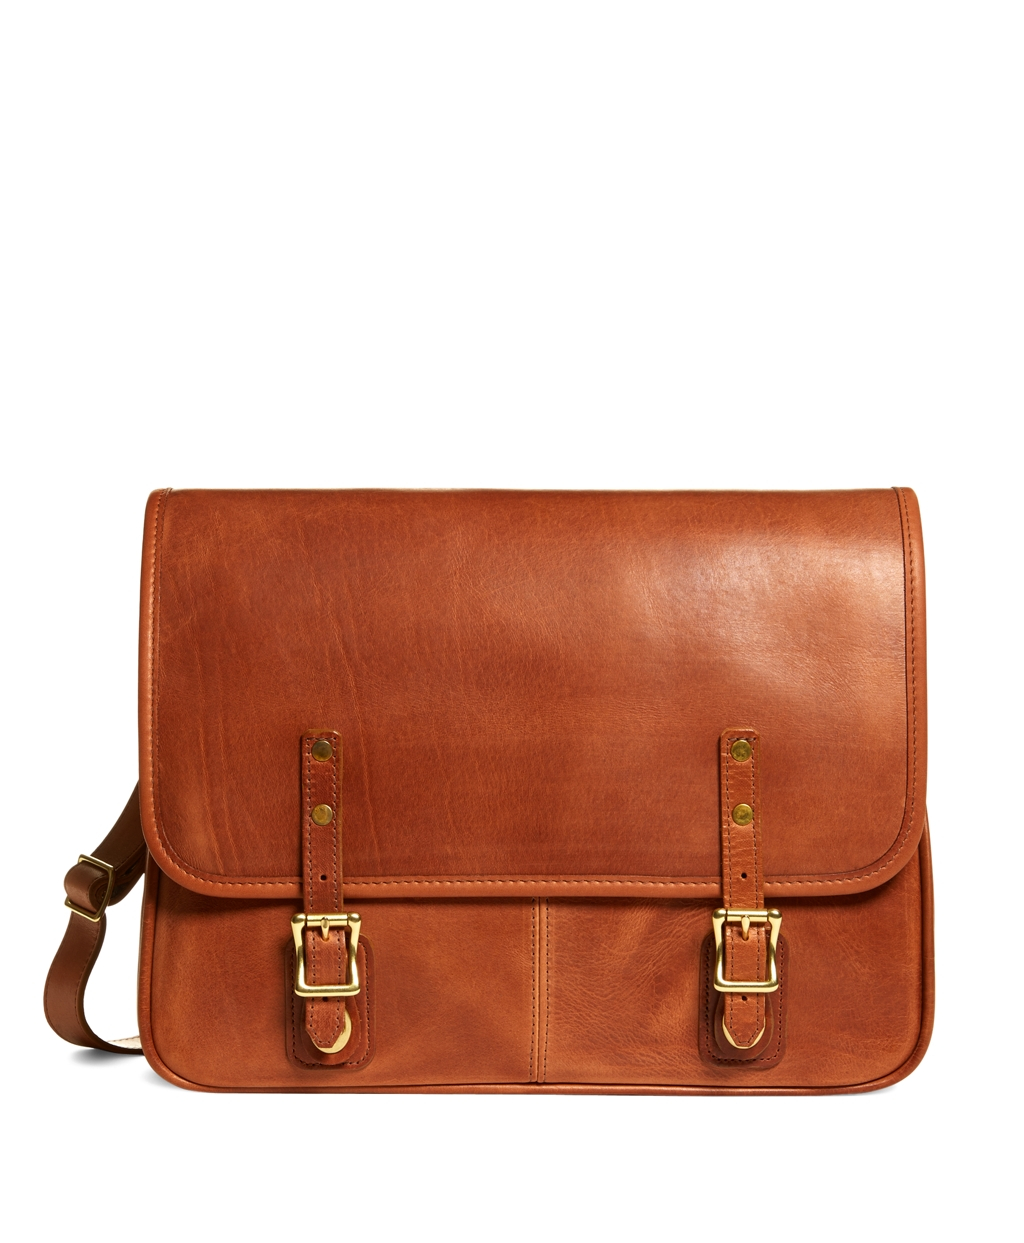 Lyst - Brooks brothers J.w. Hulme Leather Flap Messenger Bag in Brown ...